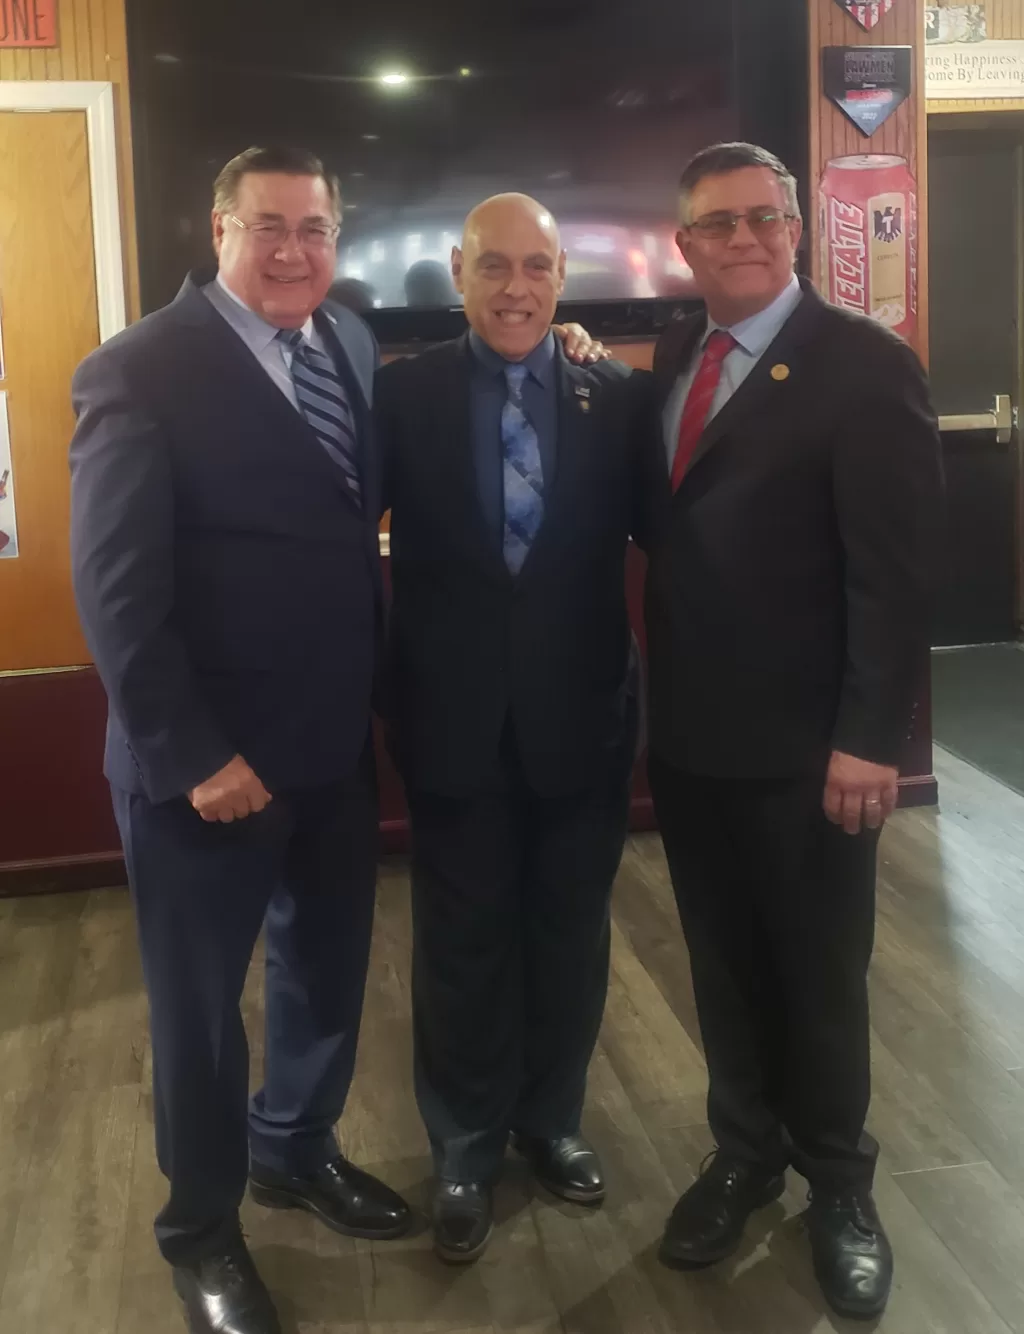 (Photo: Caitlin Crudden) Pictured (left to right): Suffolk County Executive Ed Romaine, New York State Assemblyman Joe DeStefano and Suffolk County Legislator Dominick Thorne.